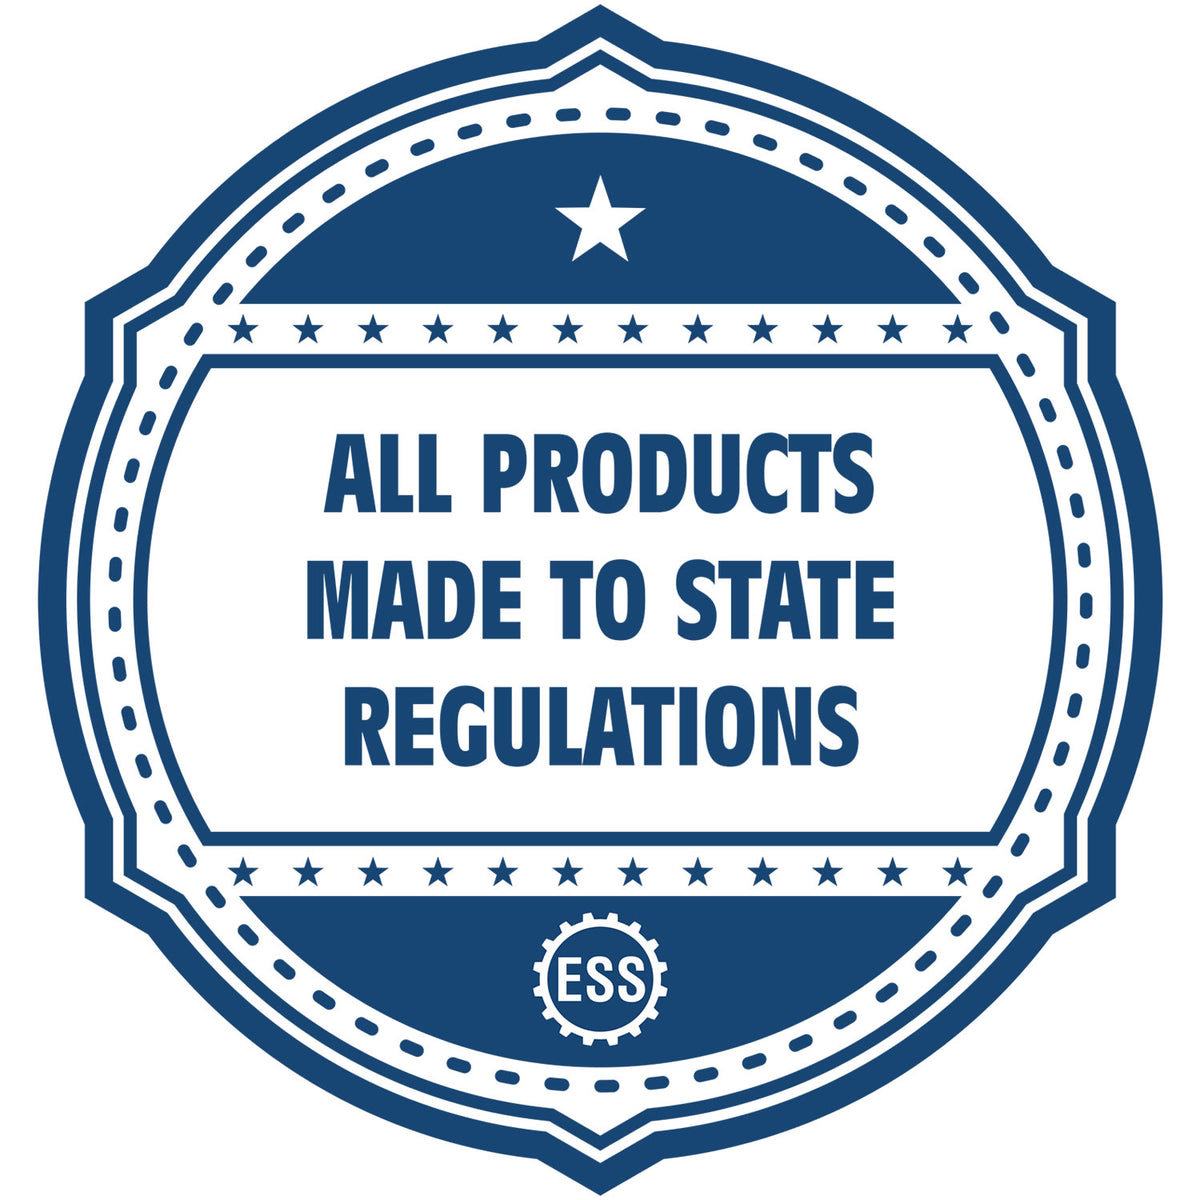 An icon or badge element for the Self-Inking Rectangular North Dakota Notary Stamp showing that this product is made in compliance with state regulations.